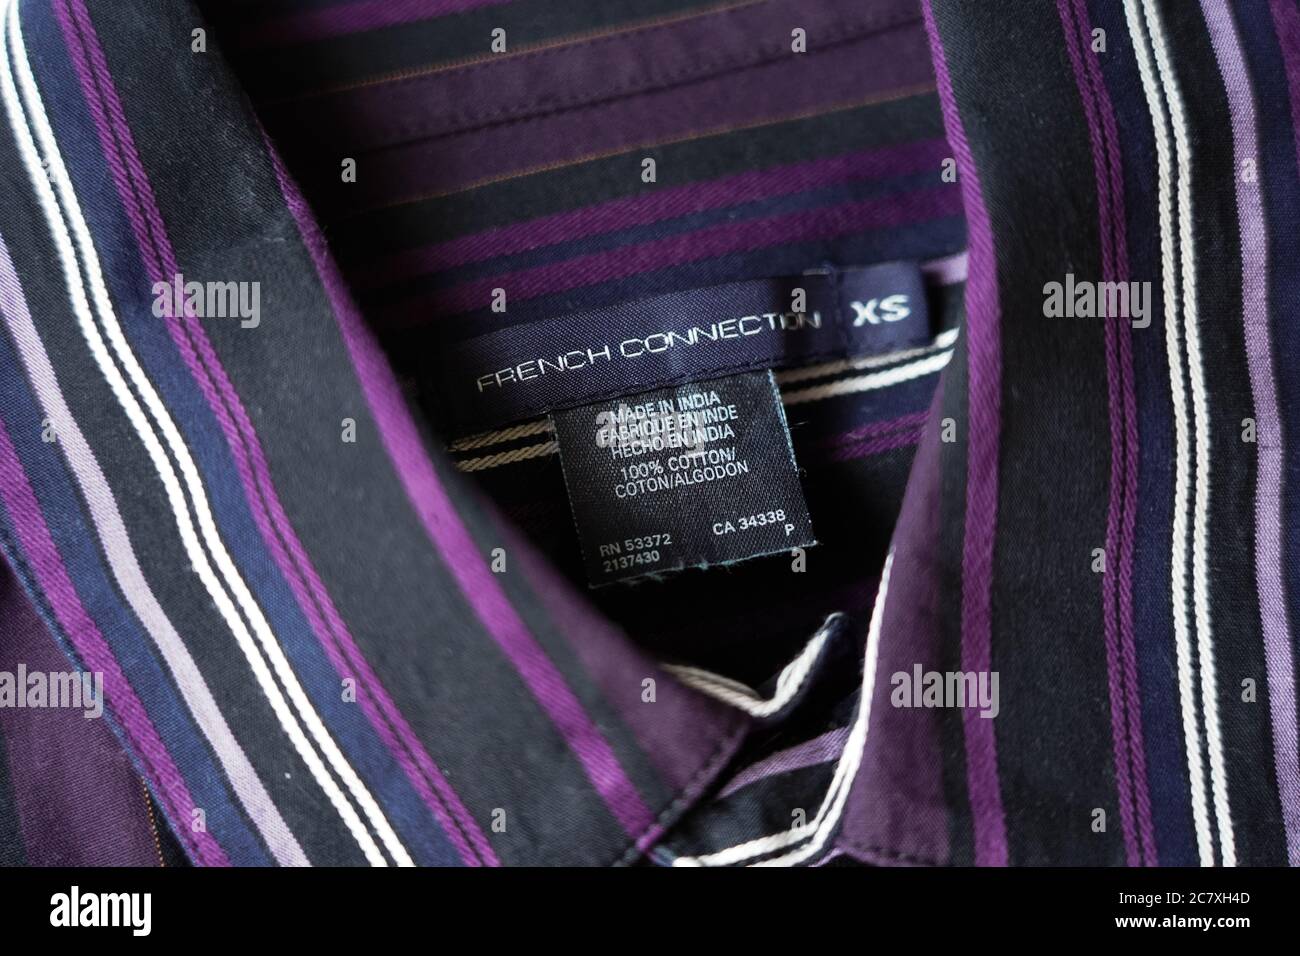 french connection dress shirt label made in india Stock Photo